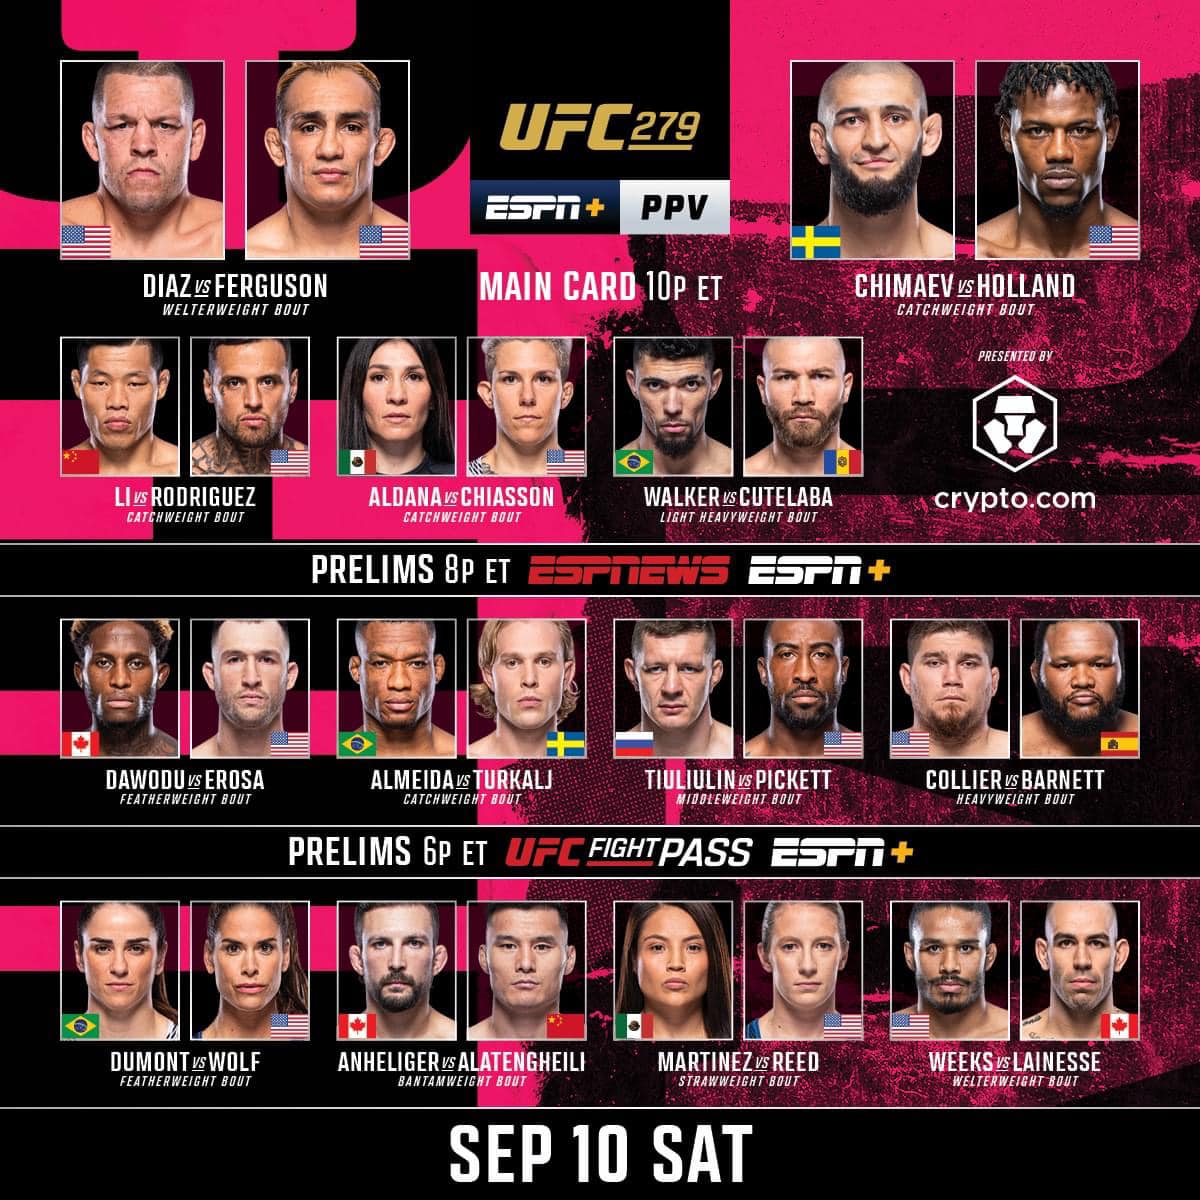 UFC 279 Results, Diaz subs Ferguson in the 4th